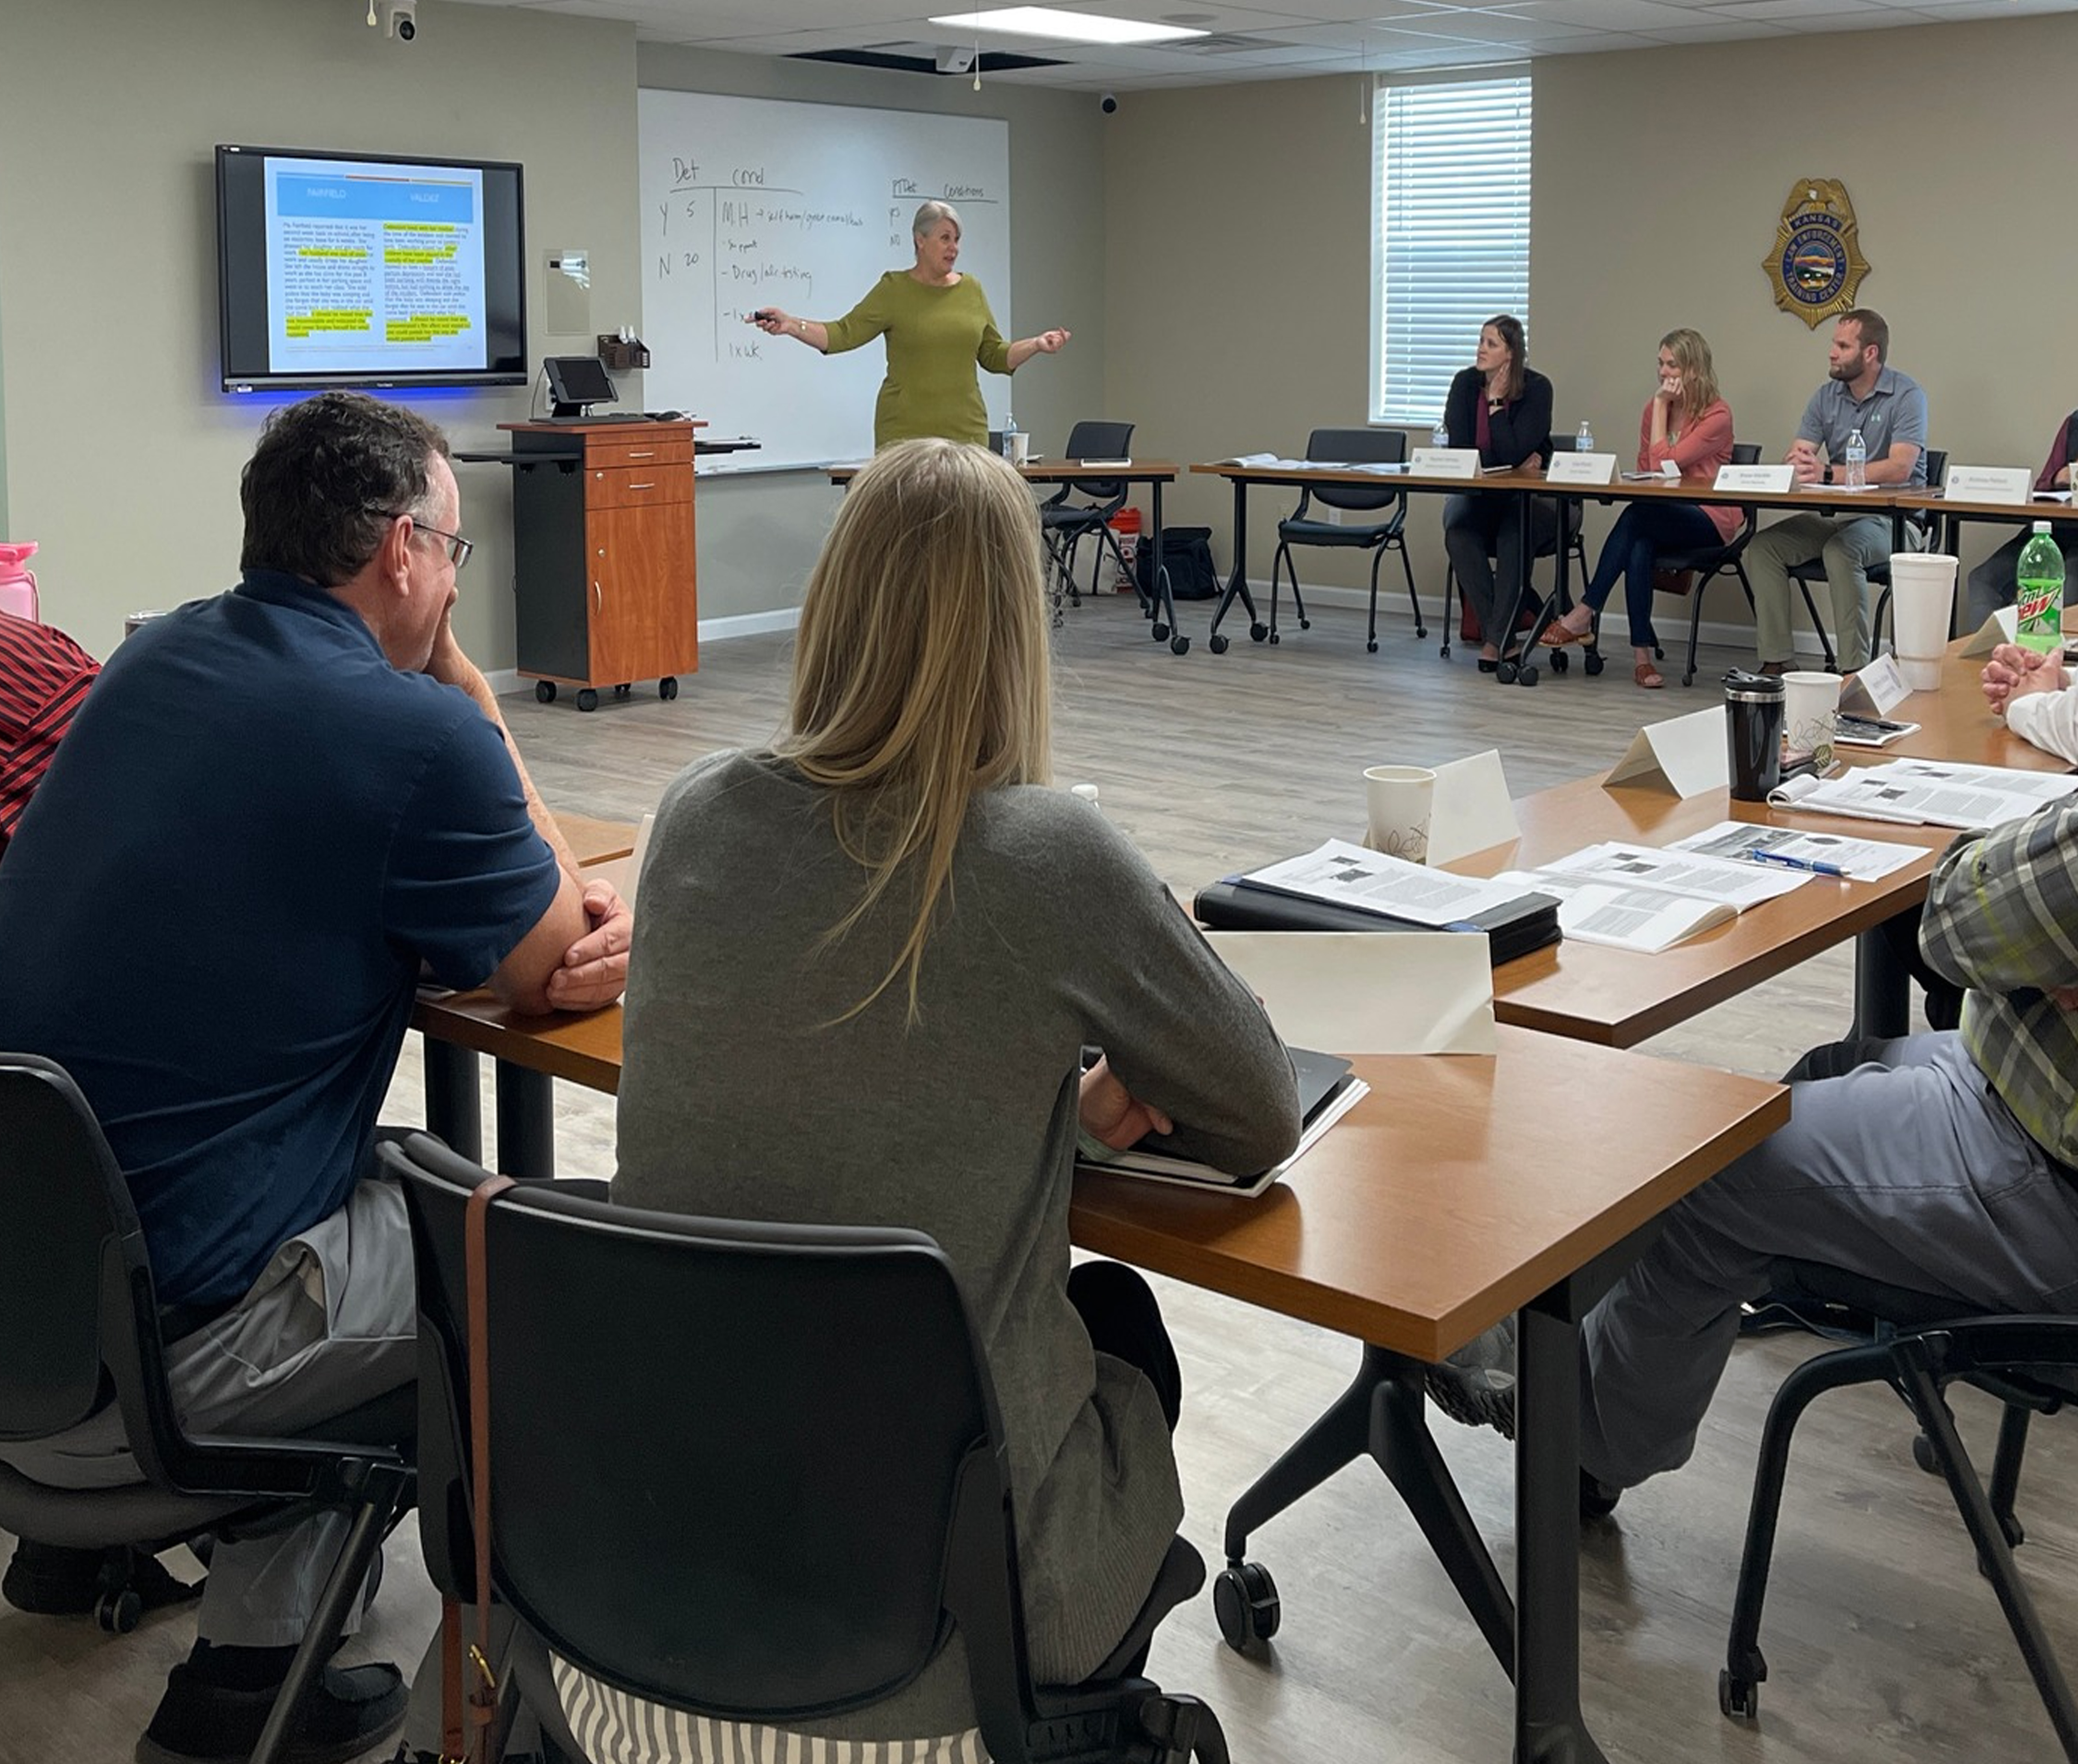 "Sophia Bernardino instructs the Fair and Impartial Policing Probation and Parole class at the KLETC regional site in Hays, KS"